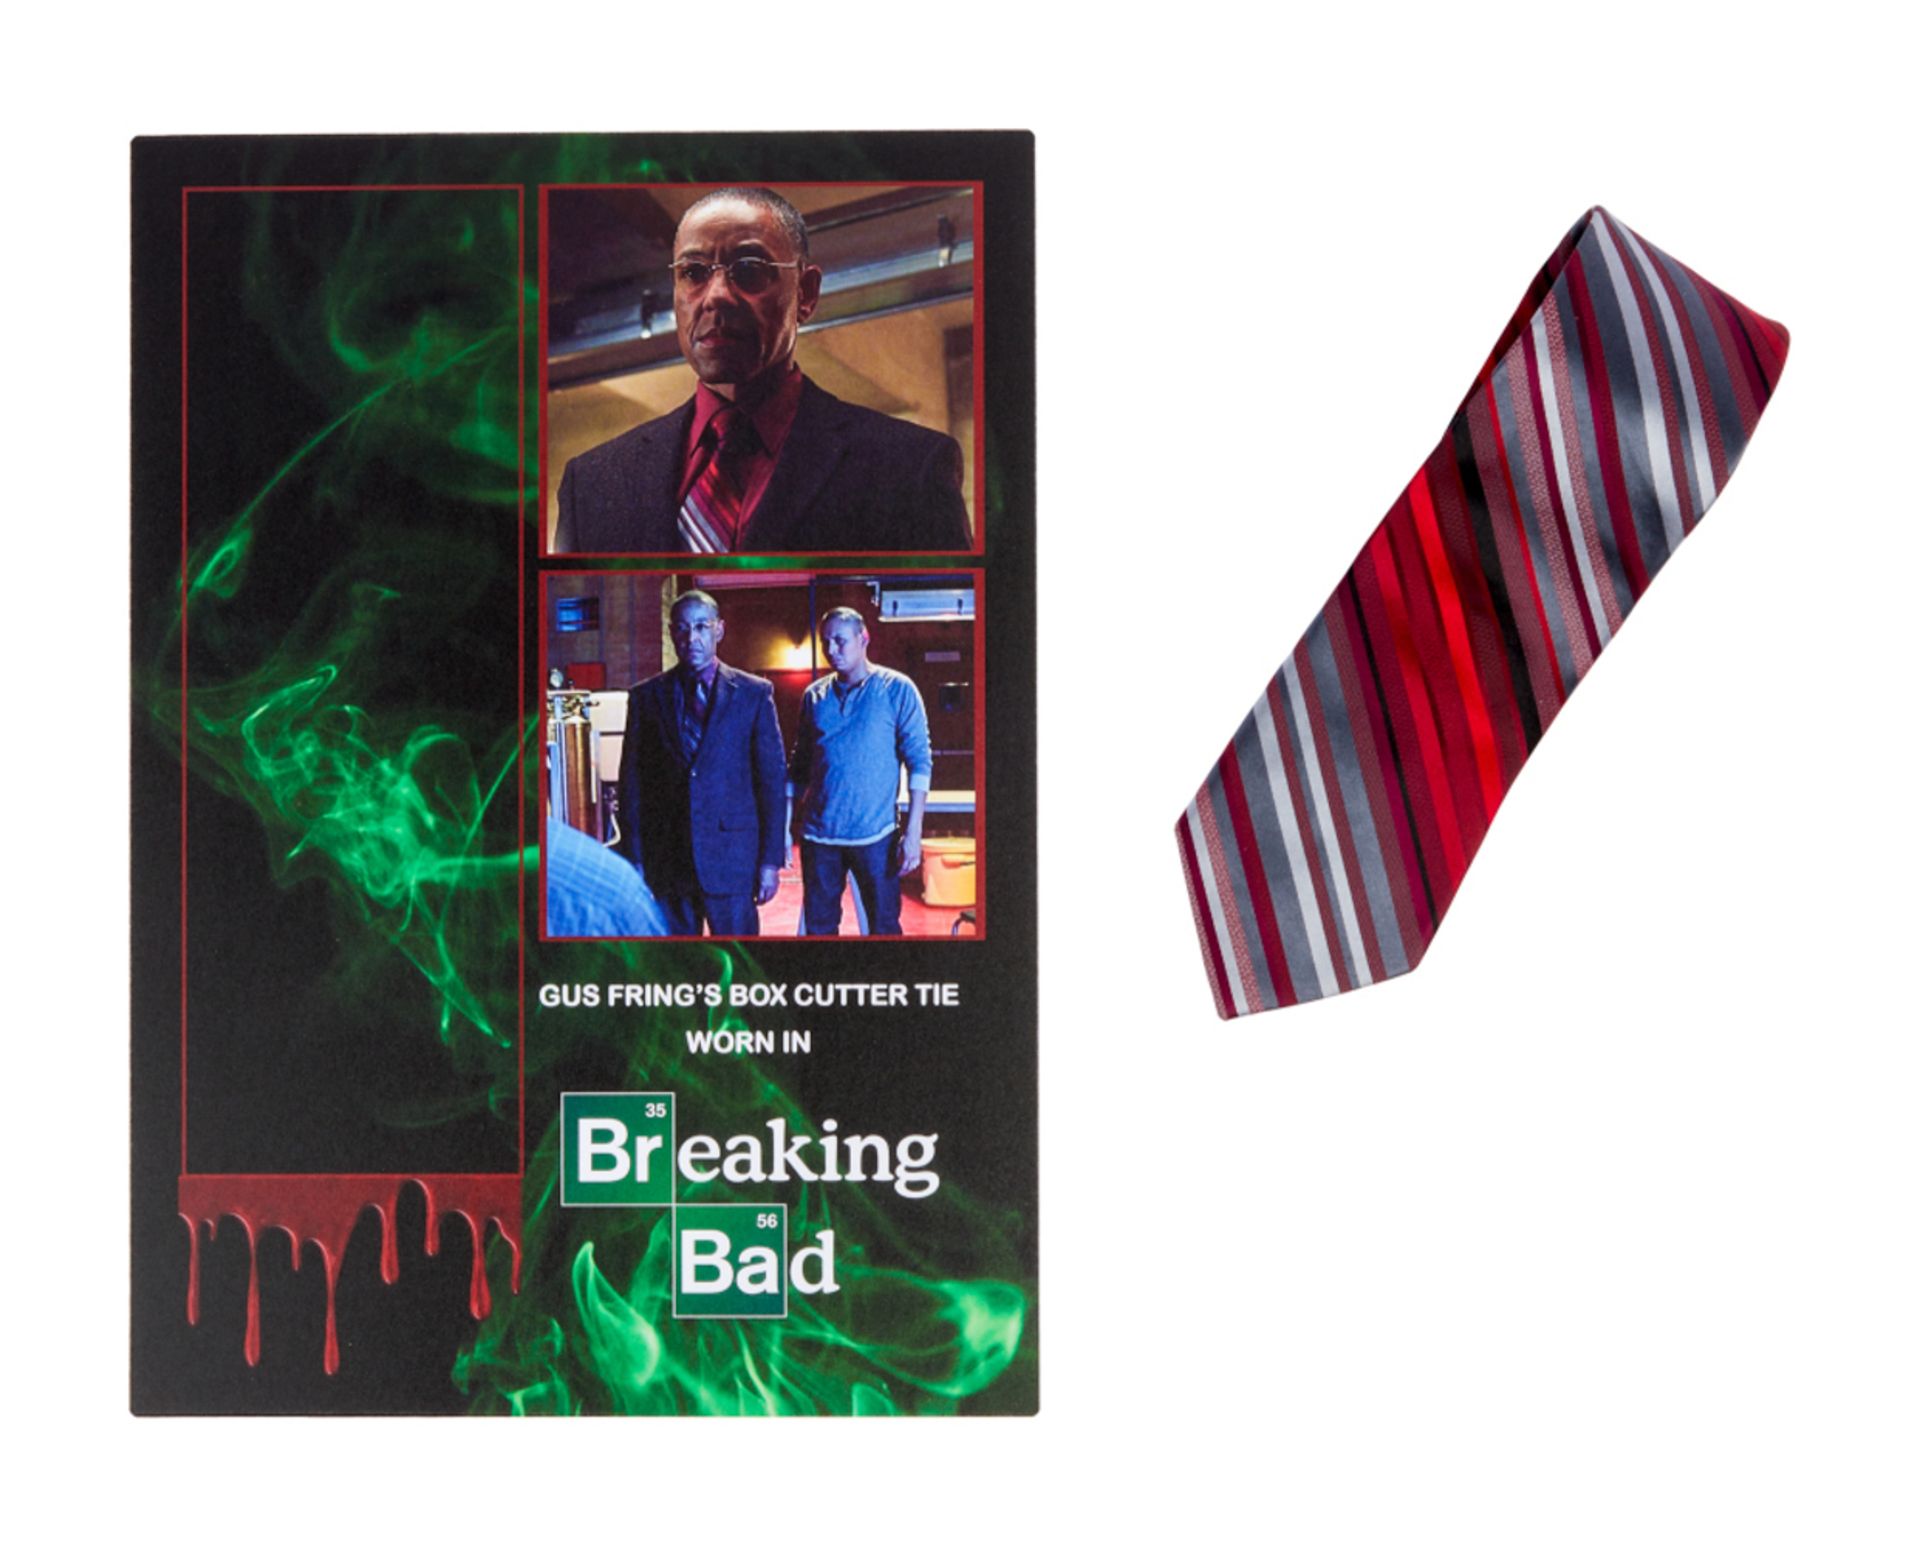 BREAKING BAD | GIANCARLO ESPOSITO "GUS FRING" TIE WITH DISPLAY BOARD